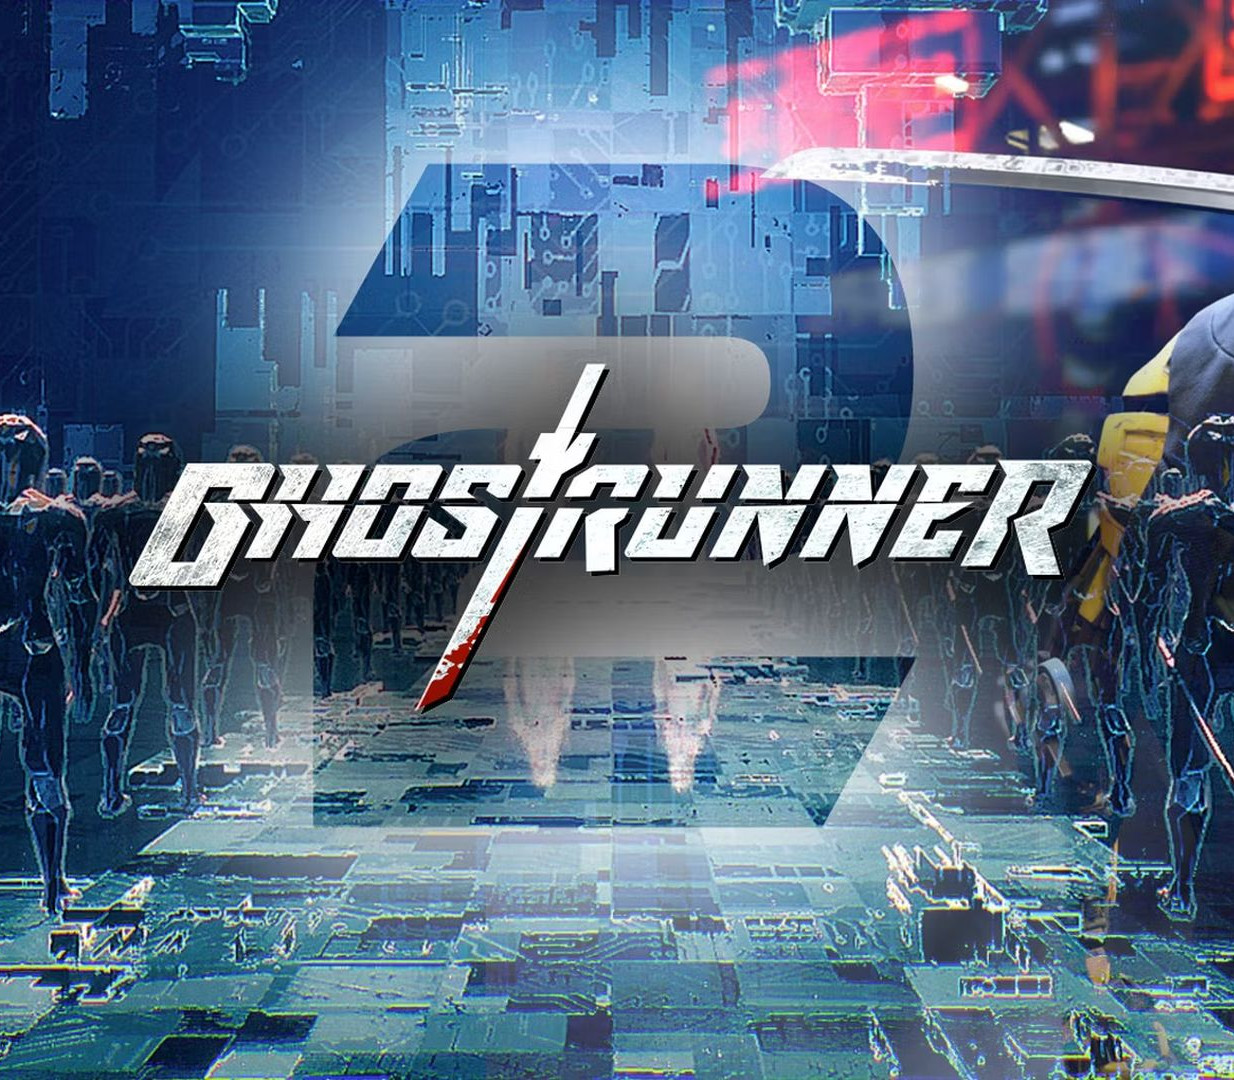 cover Ghostrunner 2 PlayStation 5 Account pixelpuffin.net Activation Link